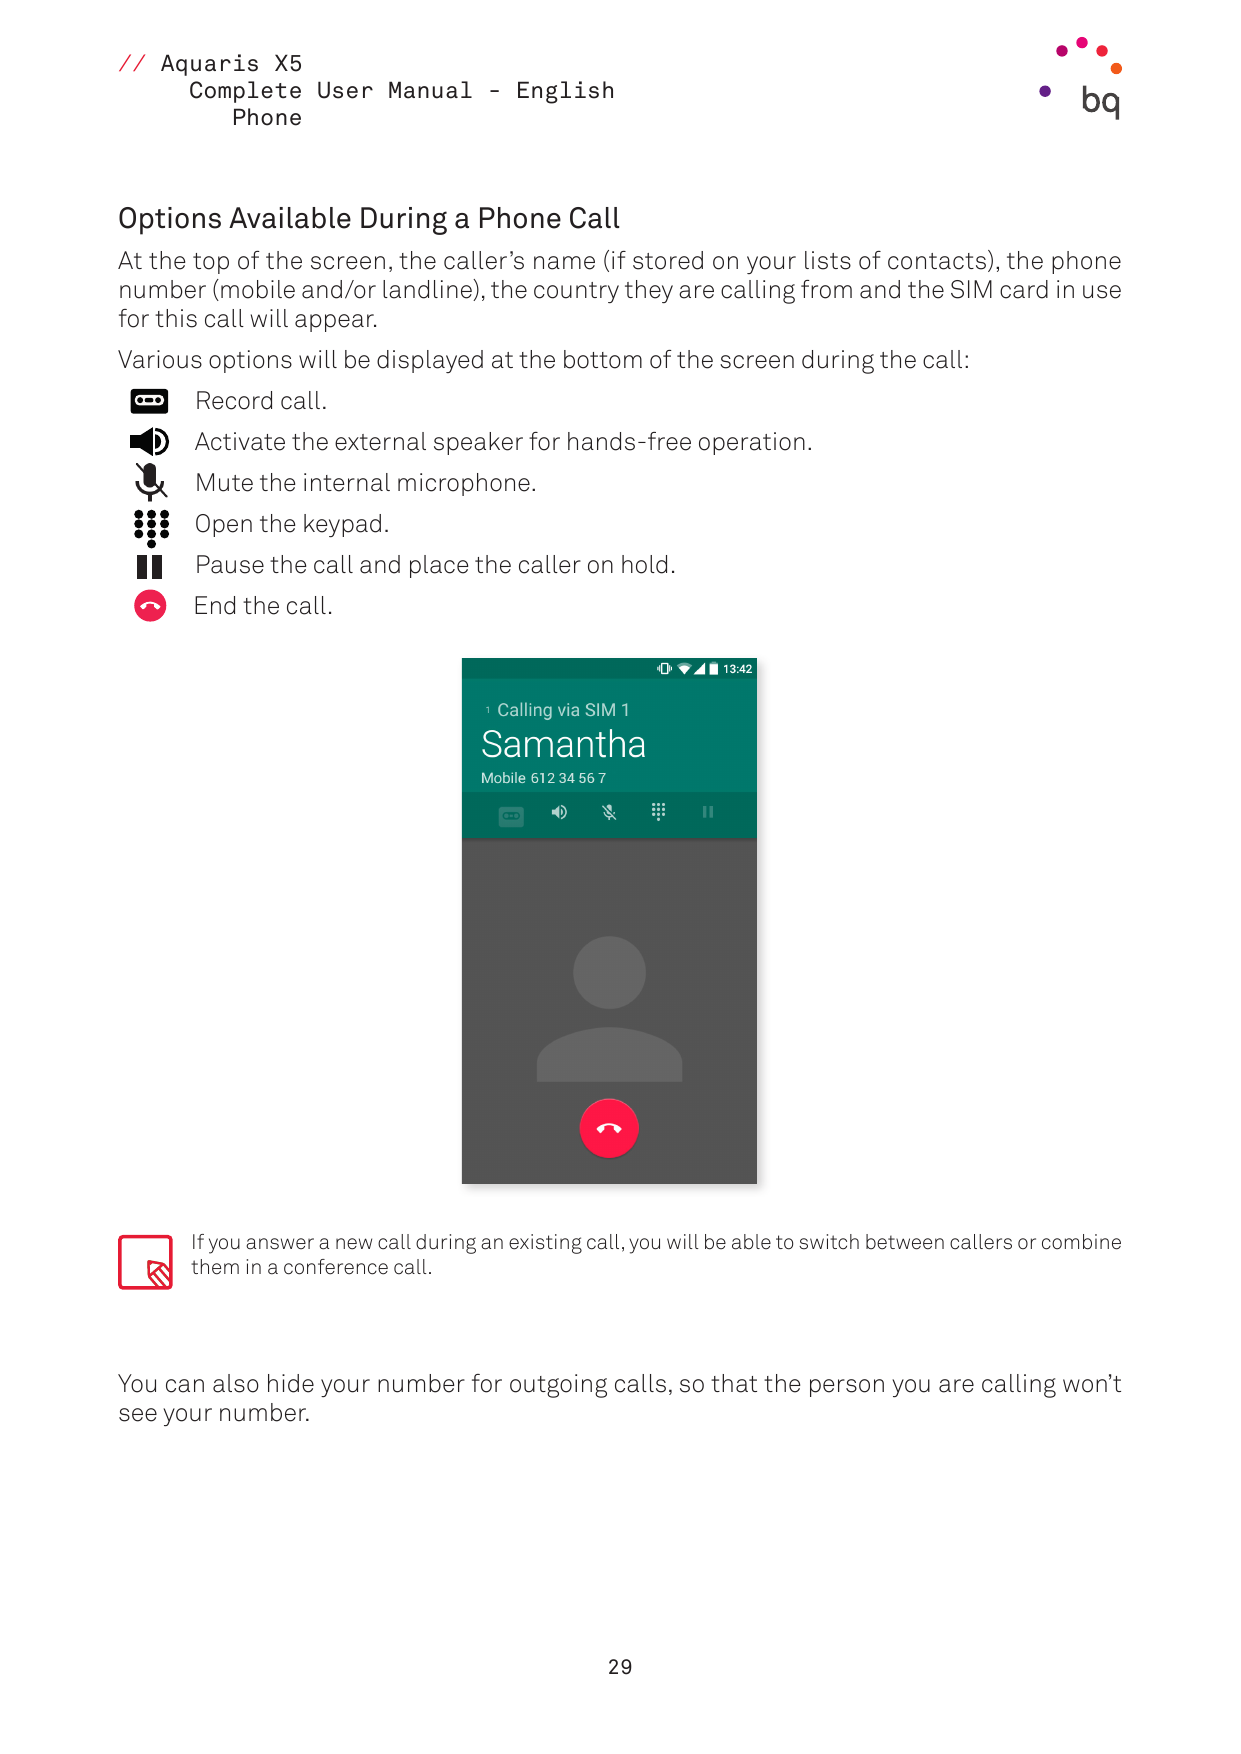 // Aquaris X5Complete User Manual - EnglishPhoneOptions Available During a Phone CallAt the top of the screen, the caller’s name